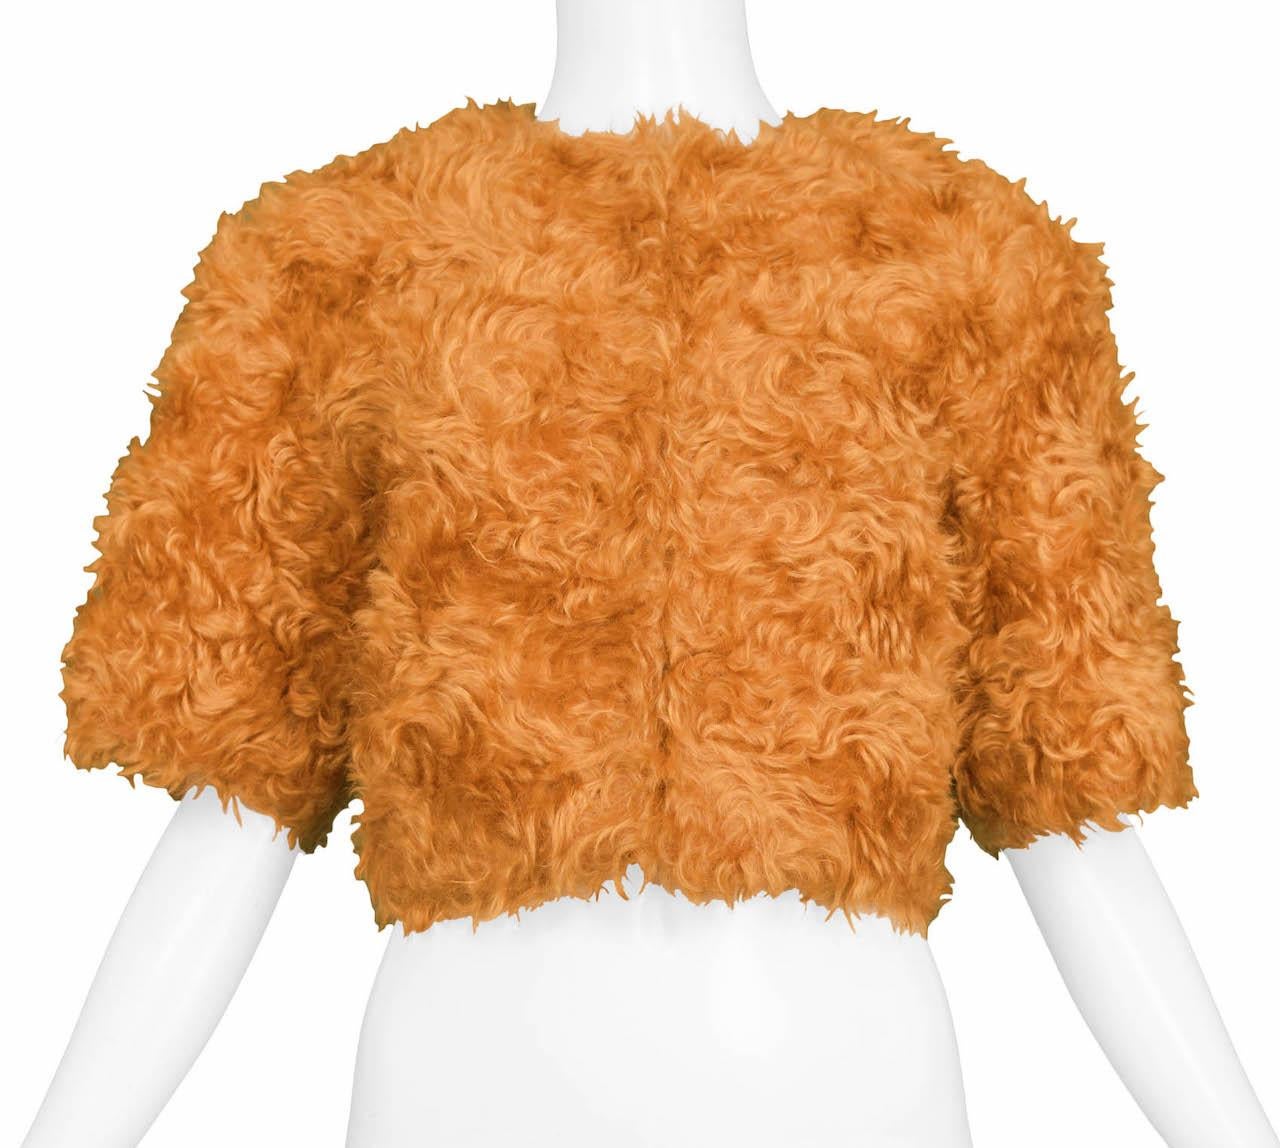 Prada Orange Mohair Cropped Jacket 2007 In Excellent Condition For Sale In Los Angeles, CA